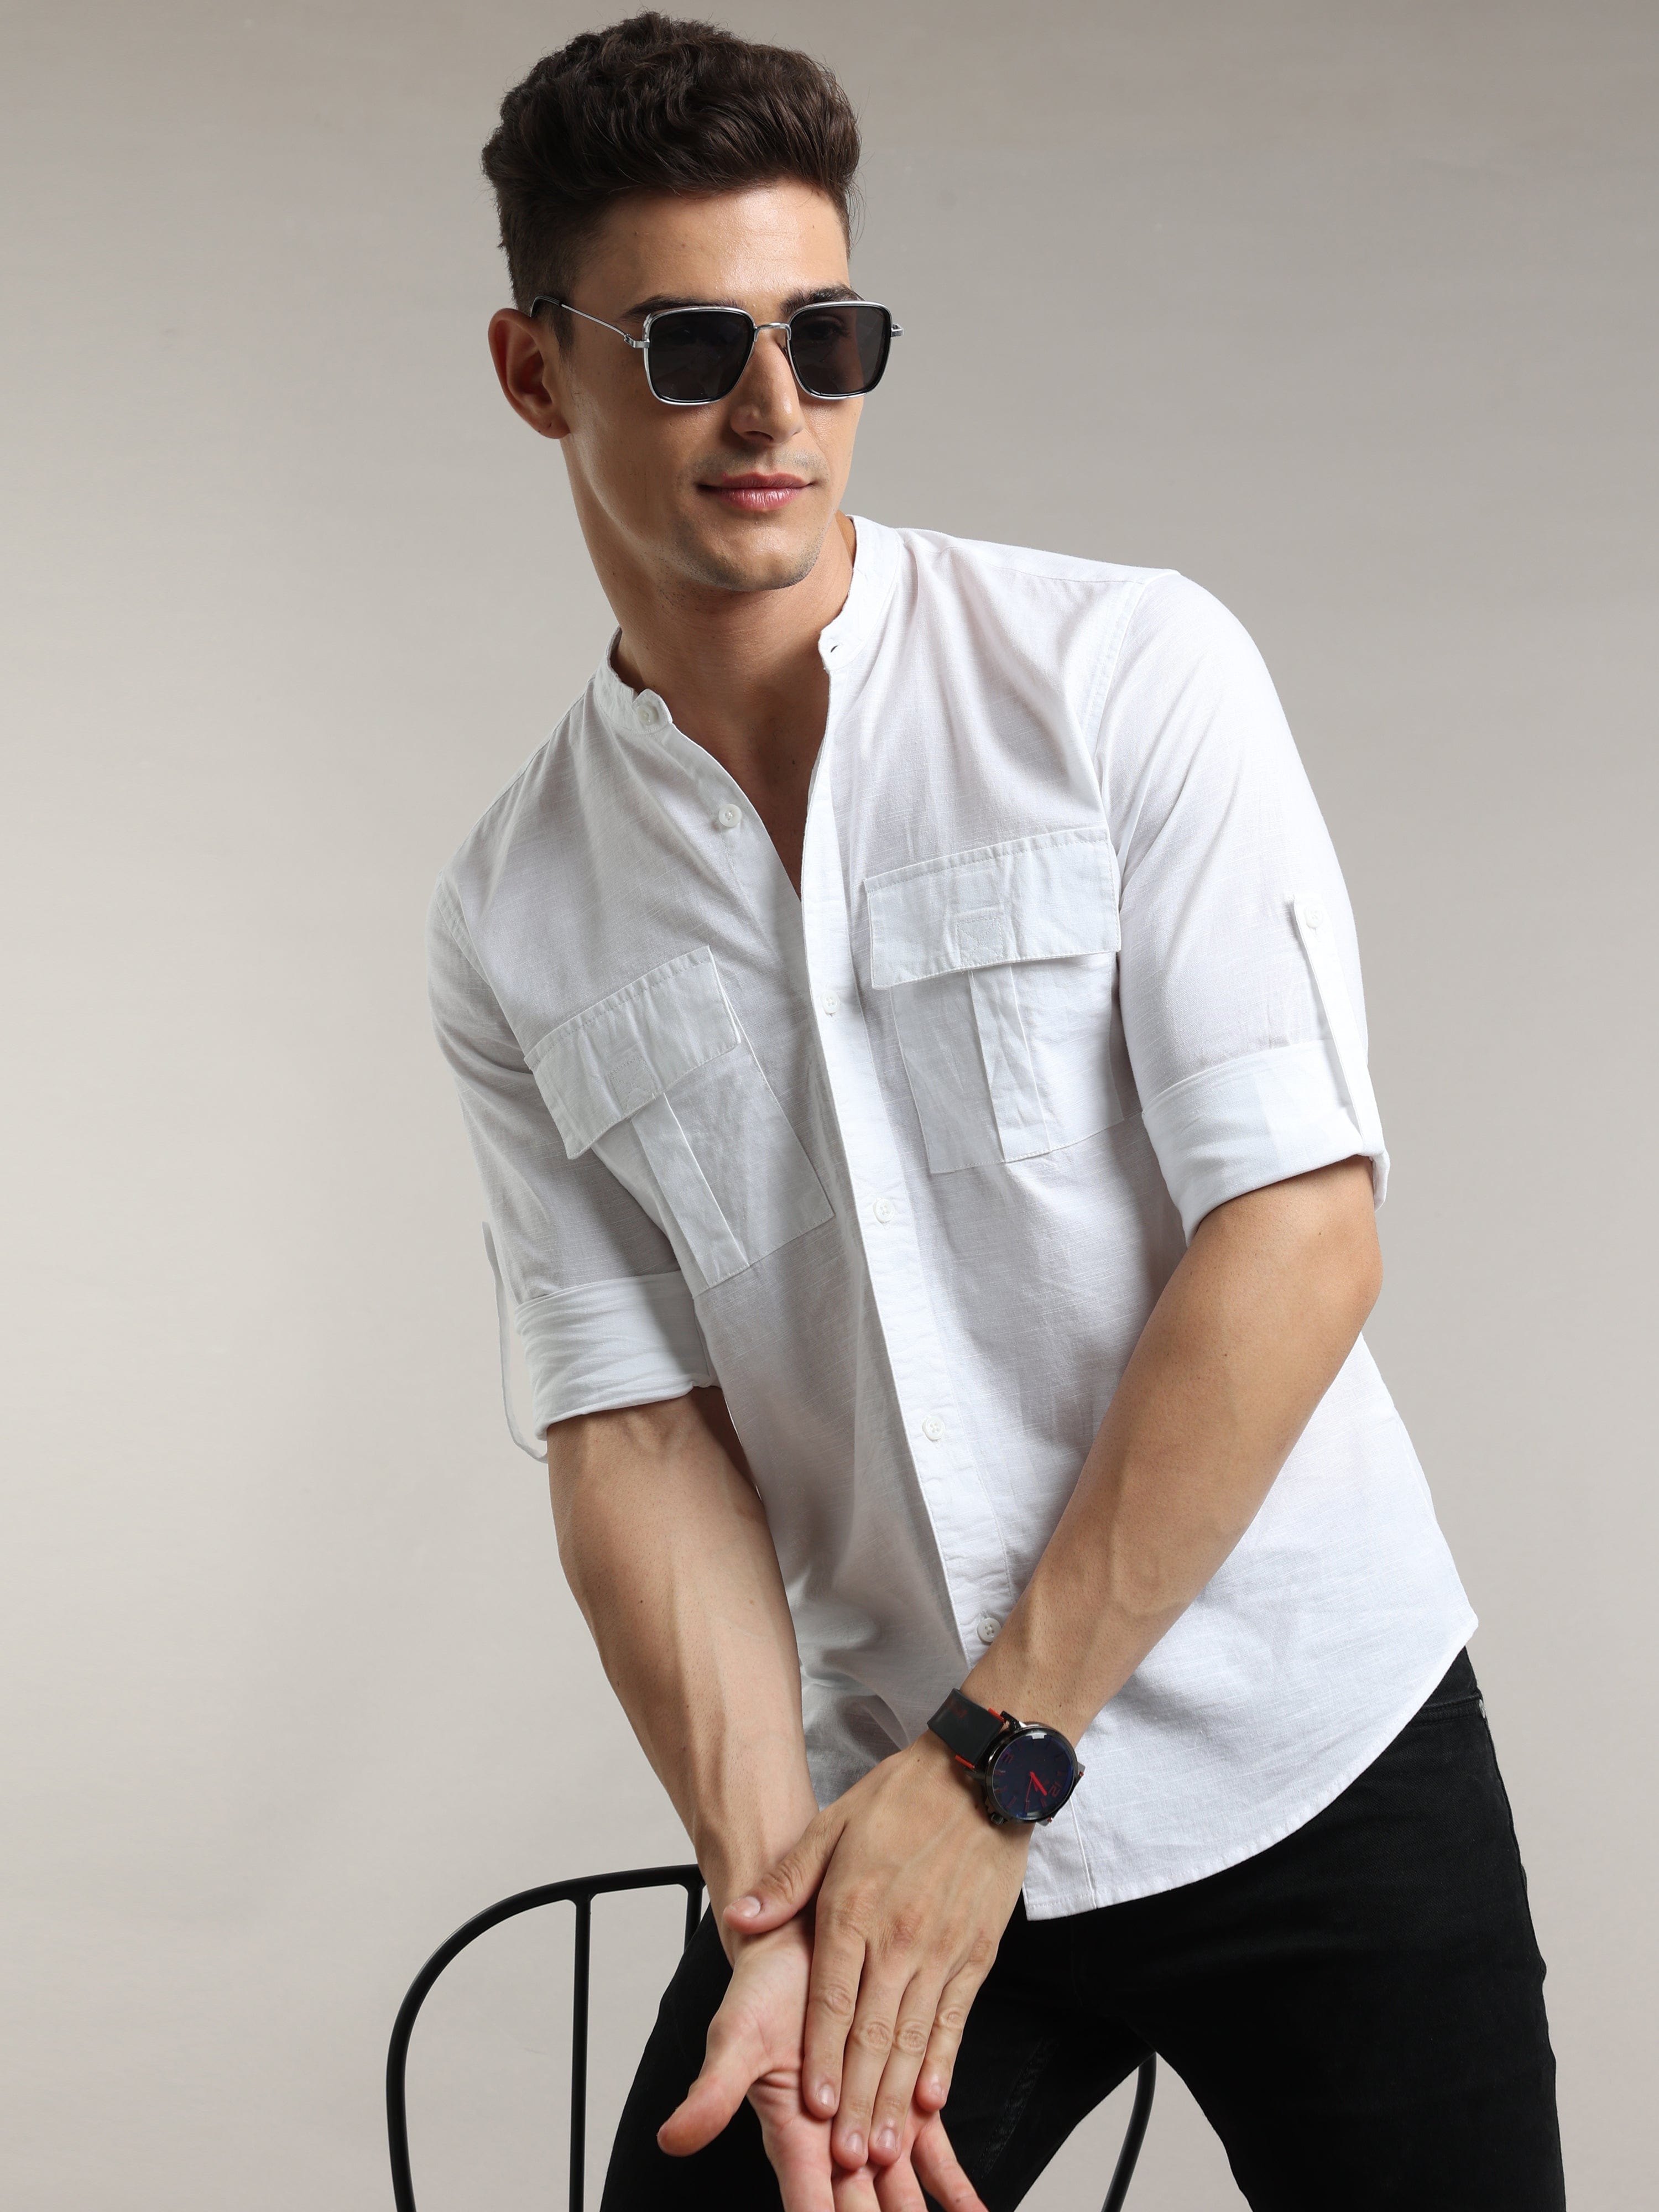 Buy Latest White Cargo Shirt For Men at Great PriceRs. 1399.00